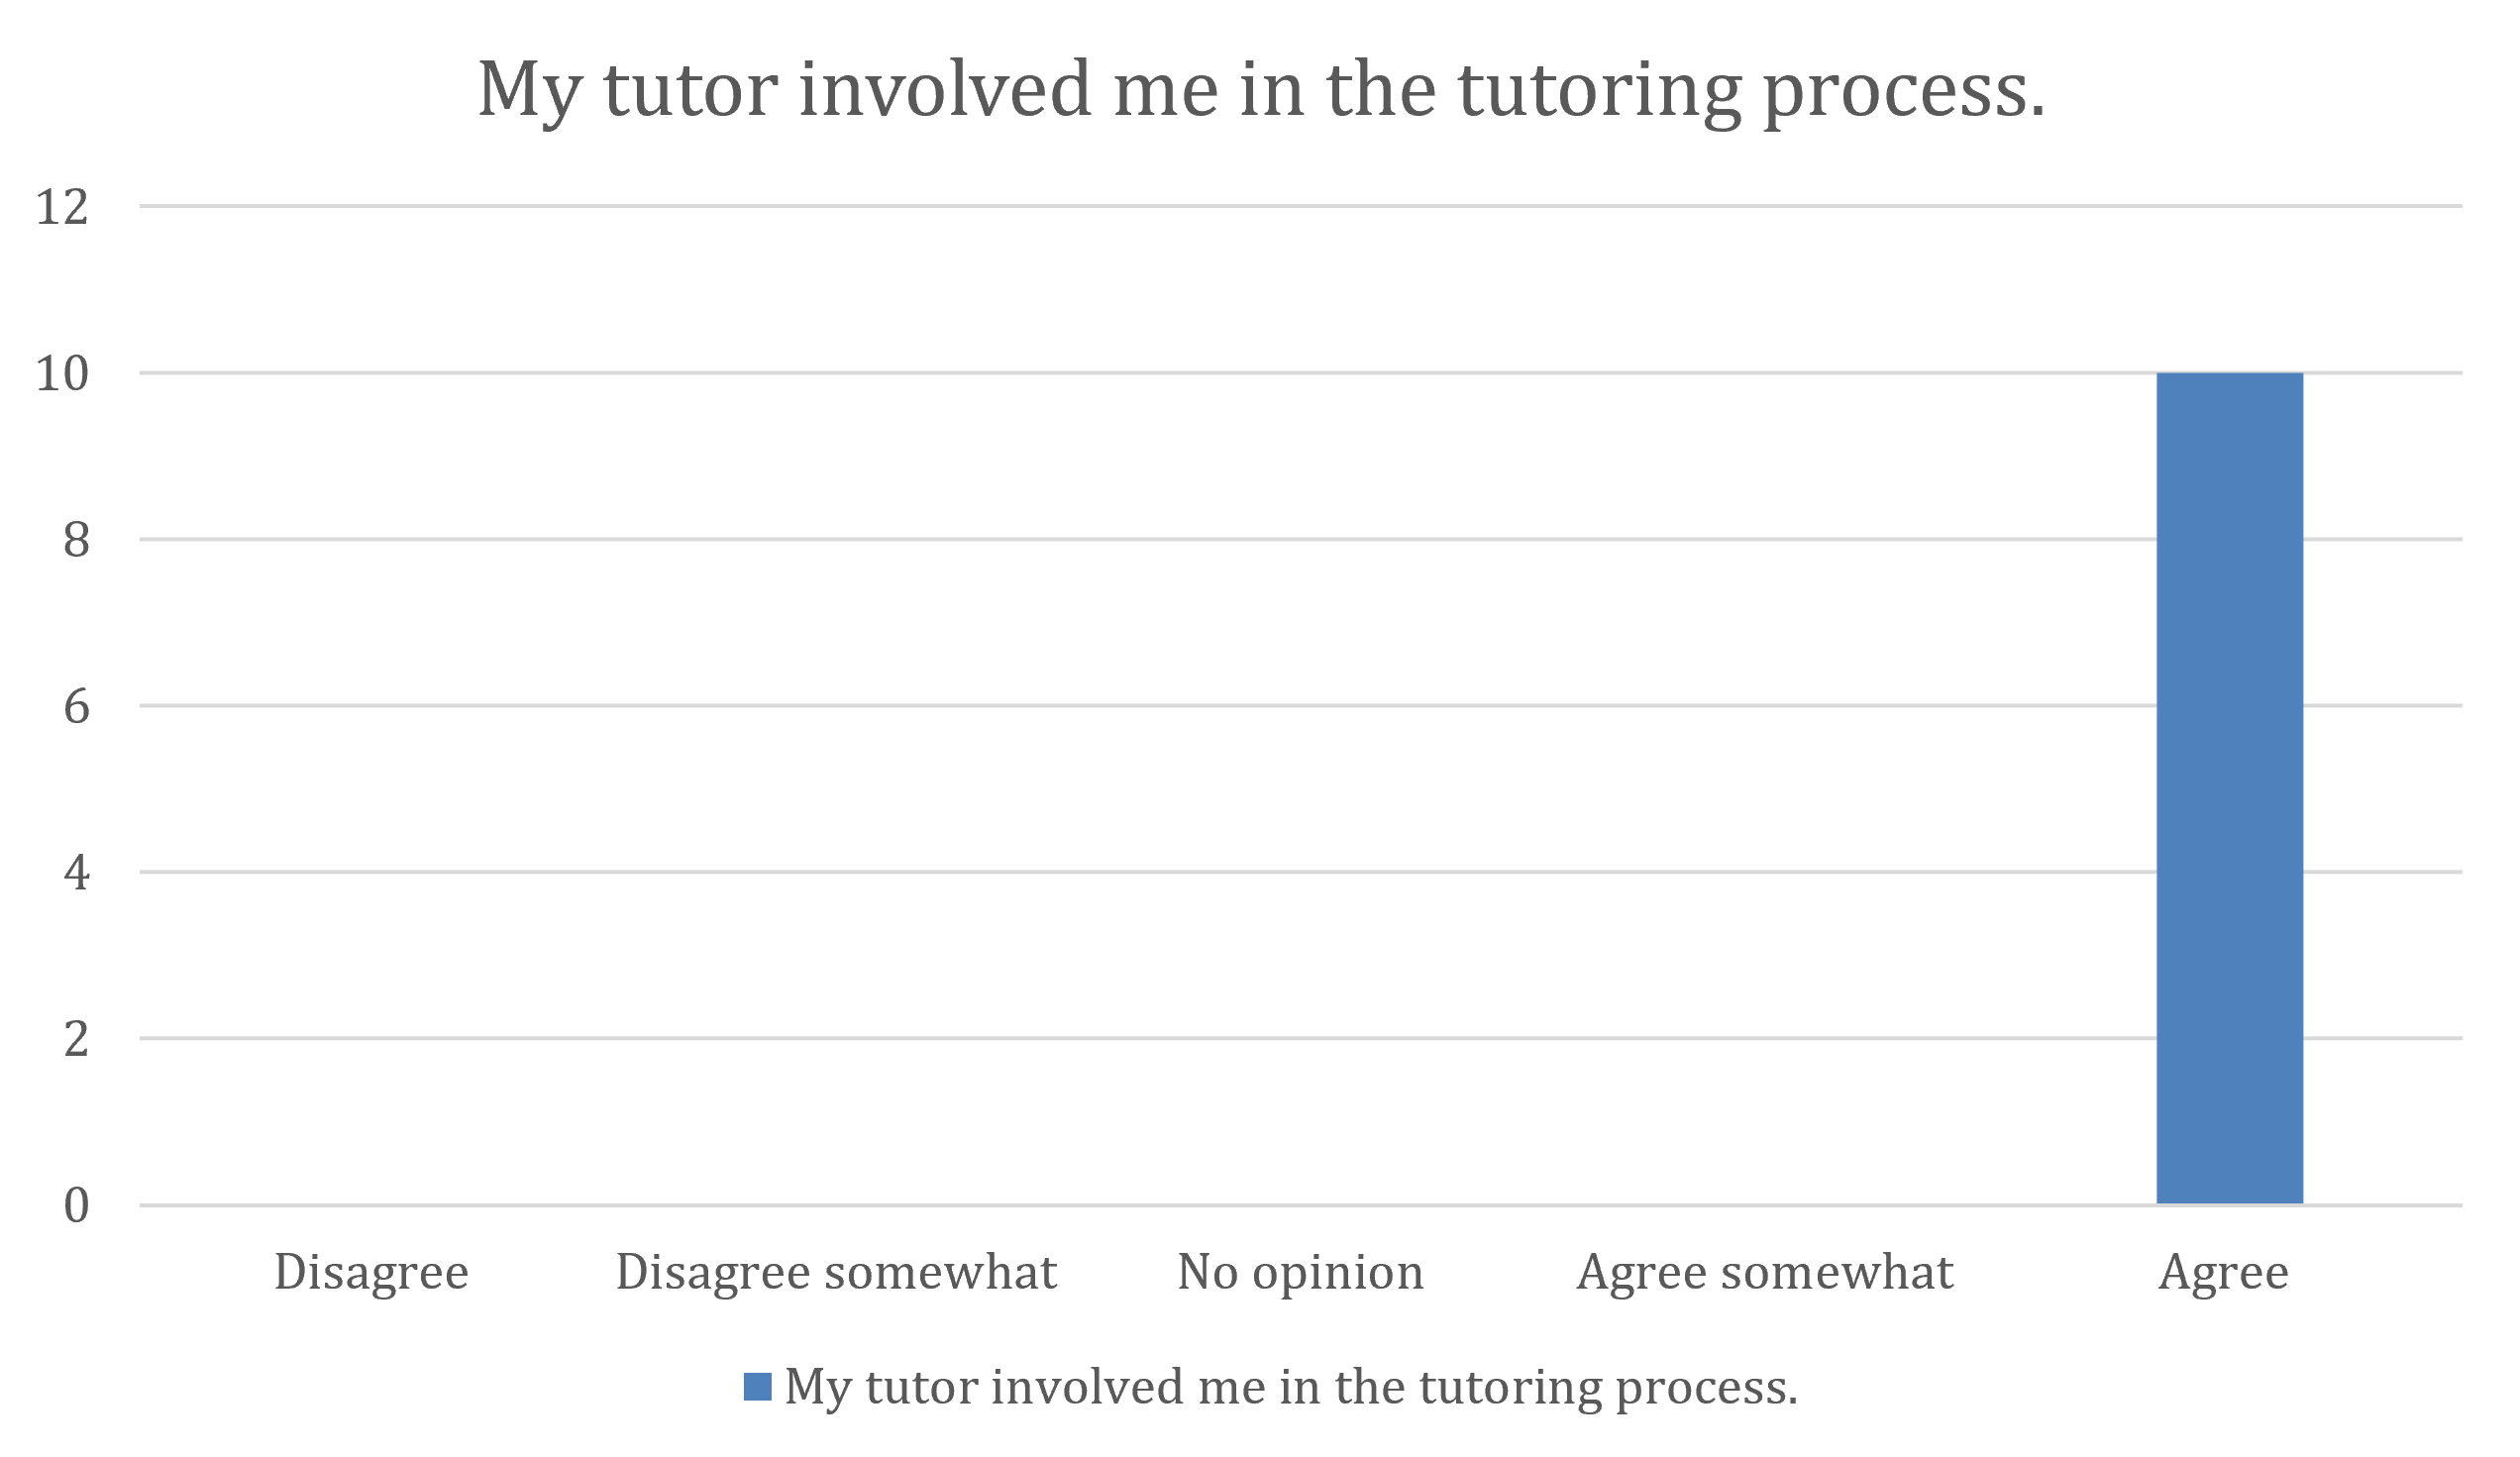 My tutor involved me in the tutoring process.